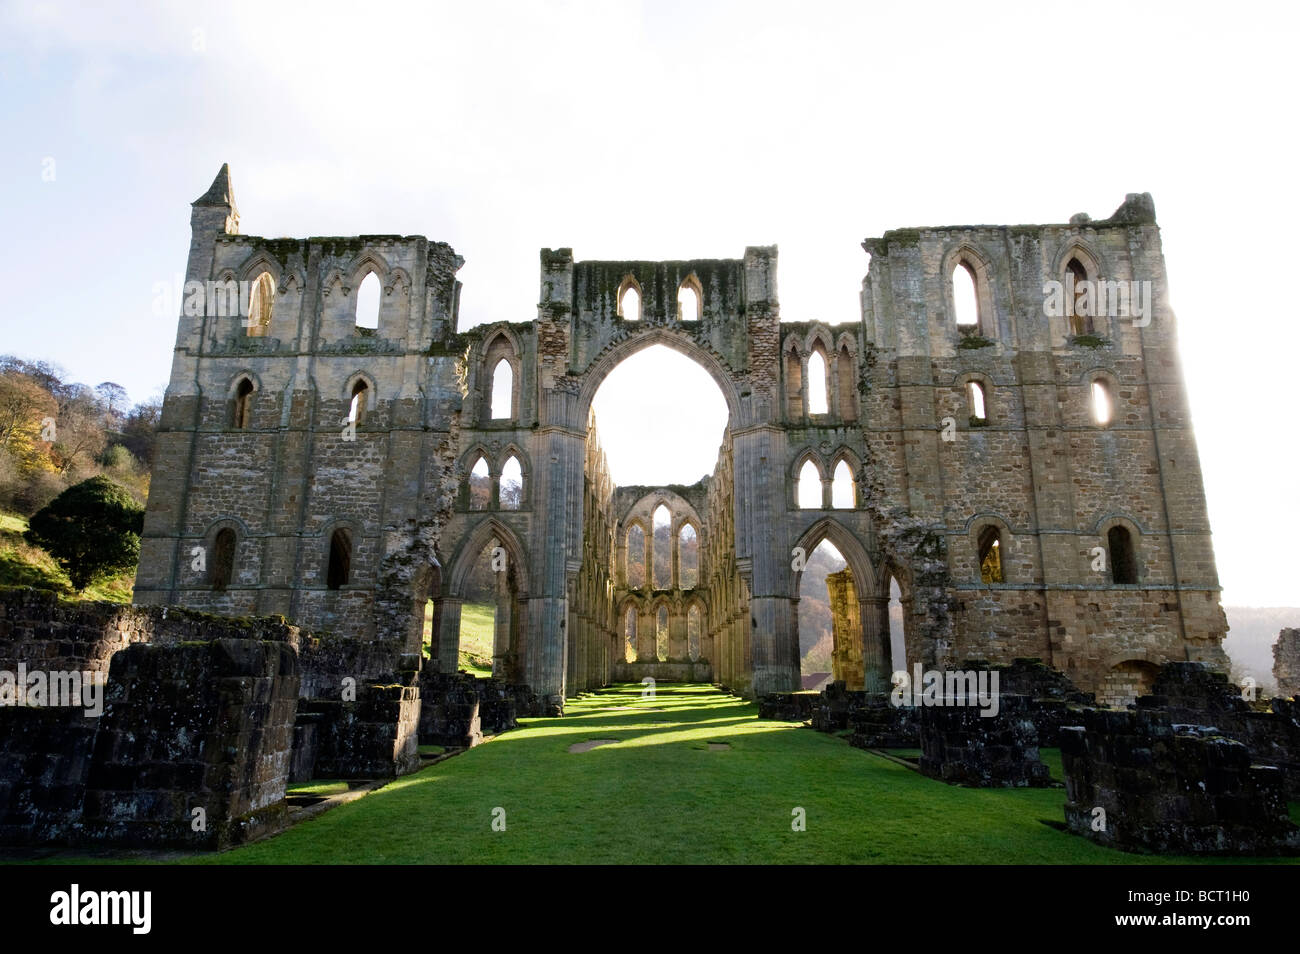 Rievaulx Abbey FOR EDITORIAL USE ONLY Stock Photo